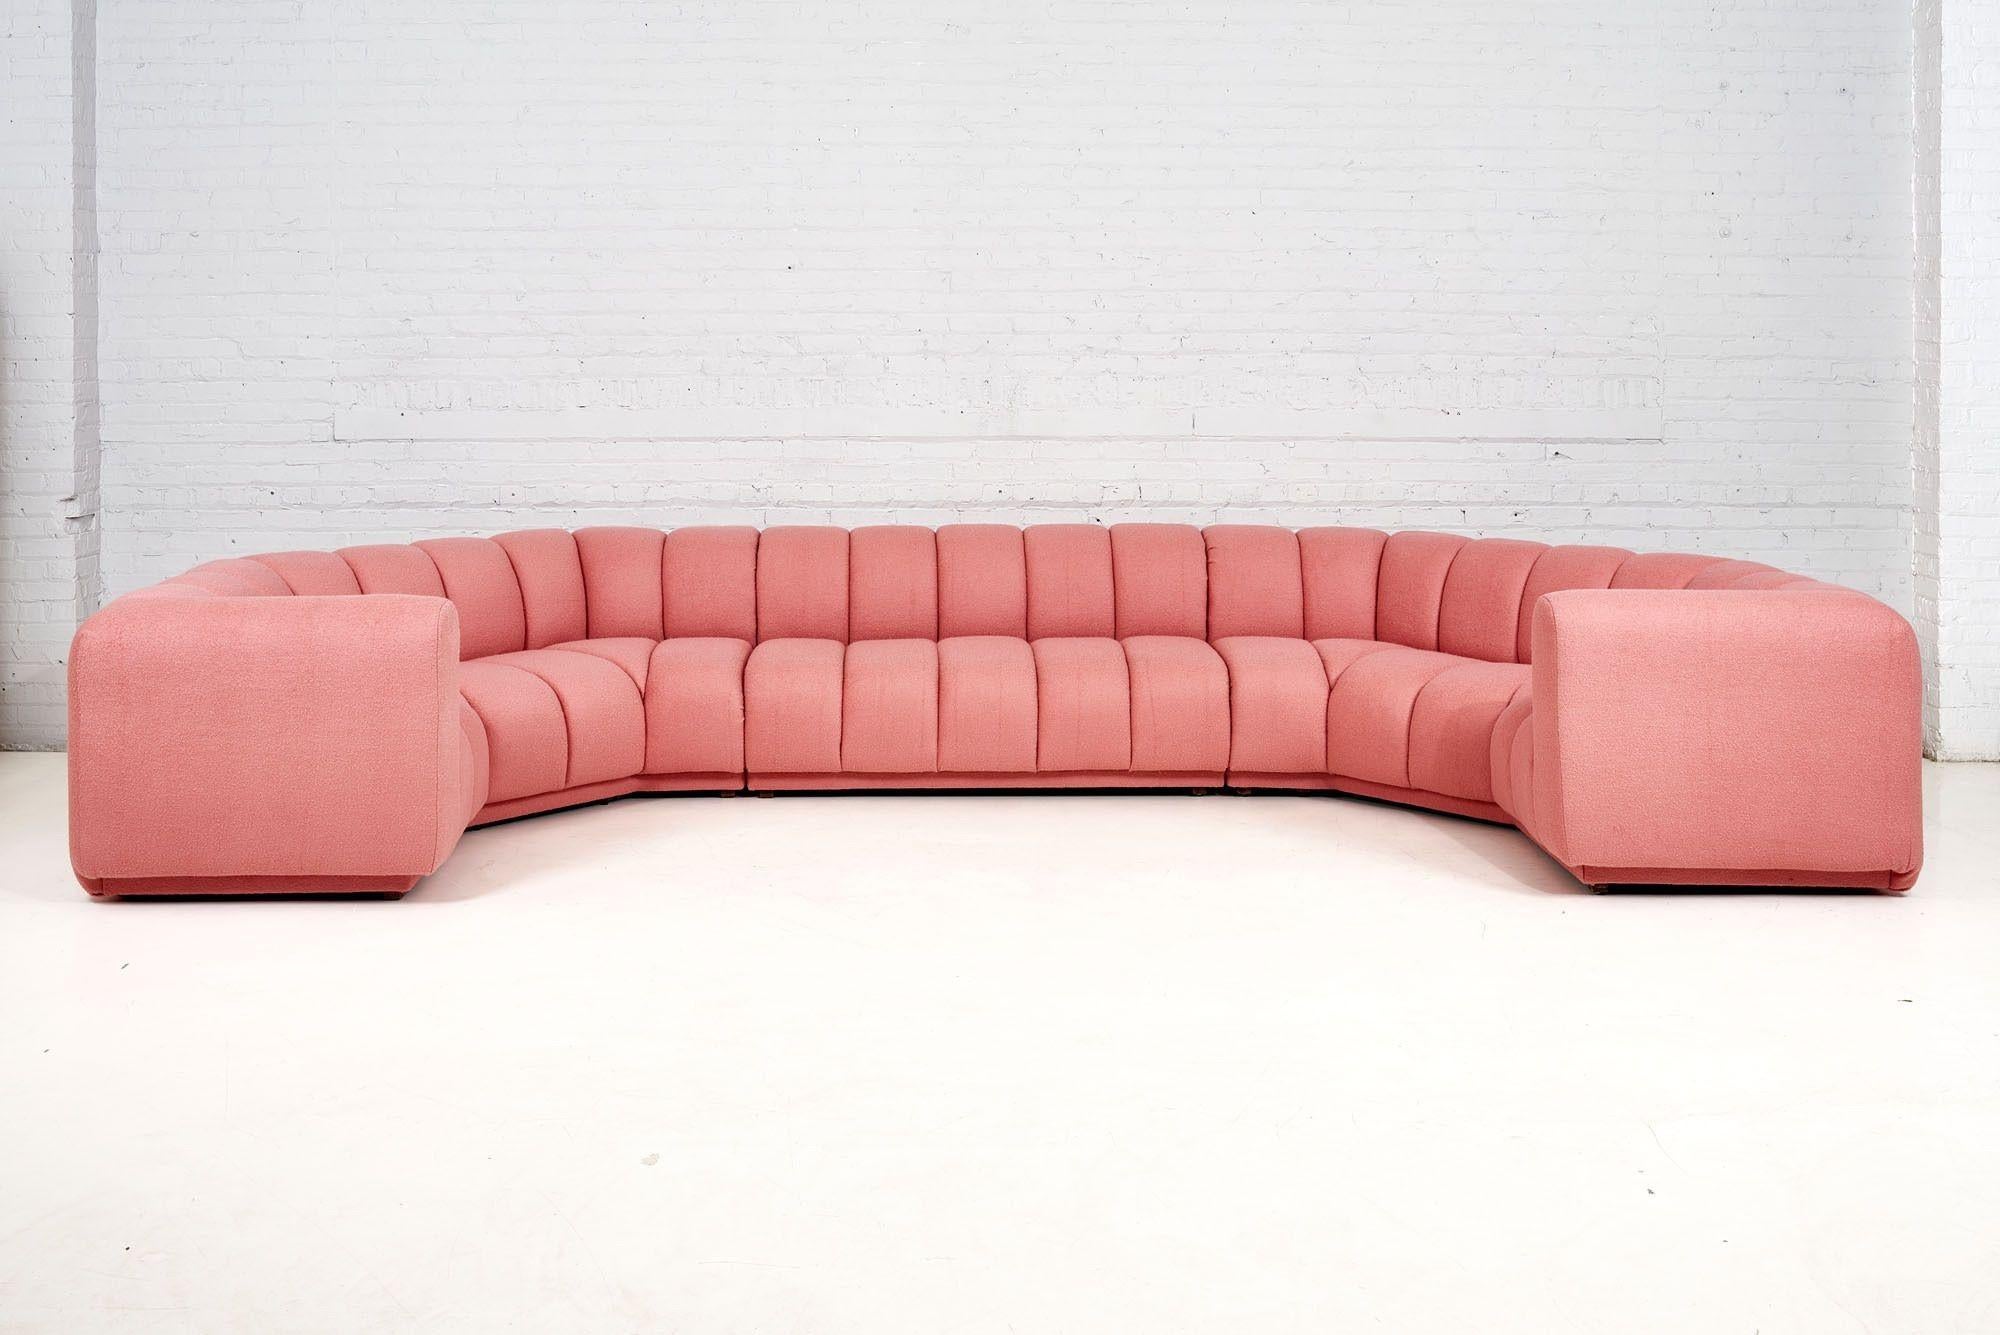 Bernhardt 3 Piece Sectional. 1970. Newly reupholstered and modified in pink boucle with channel tufting.